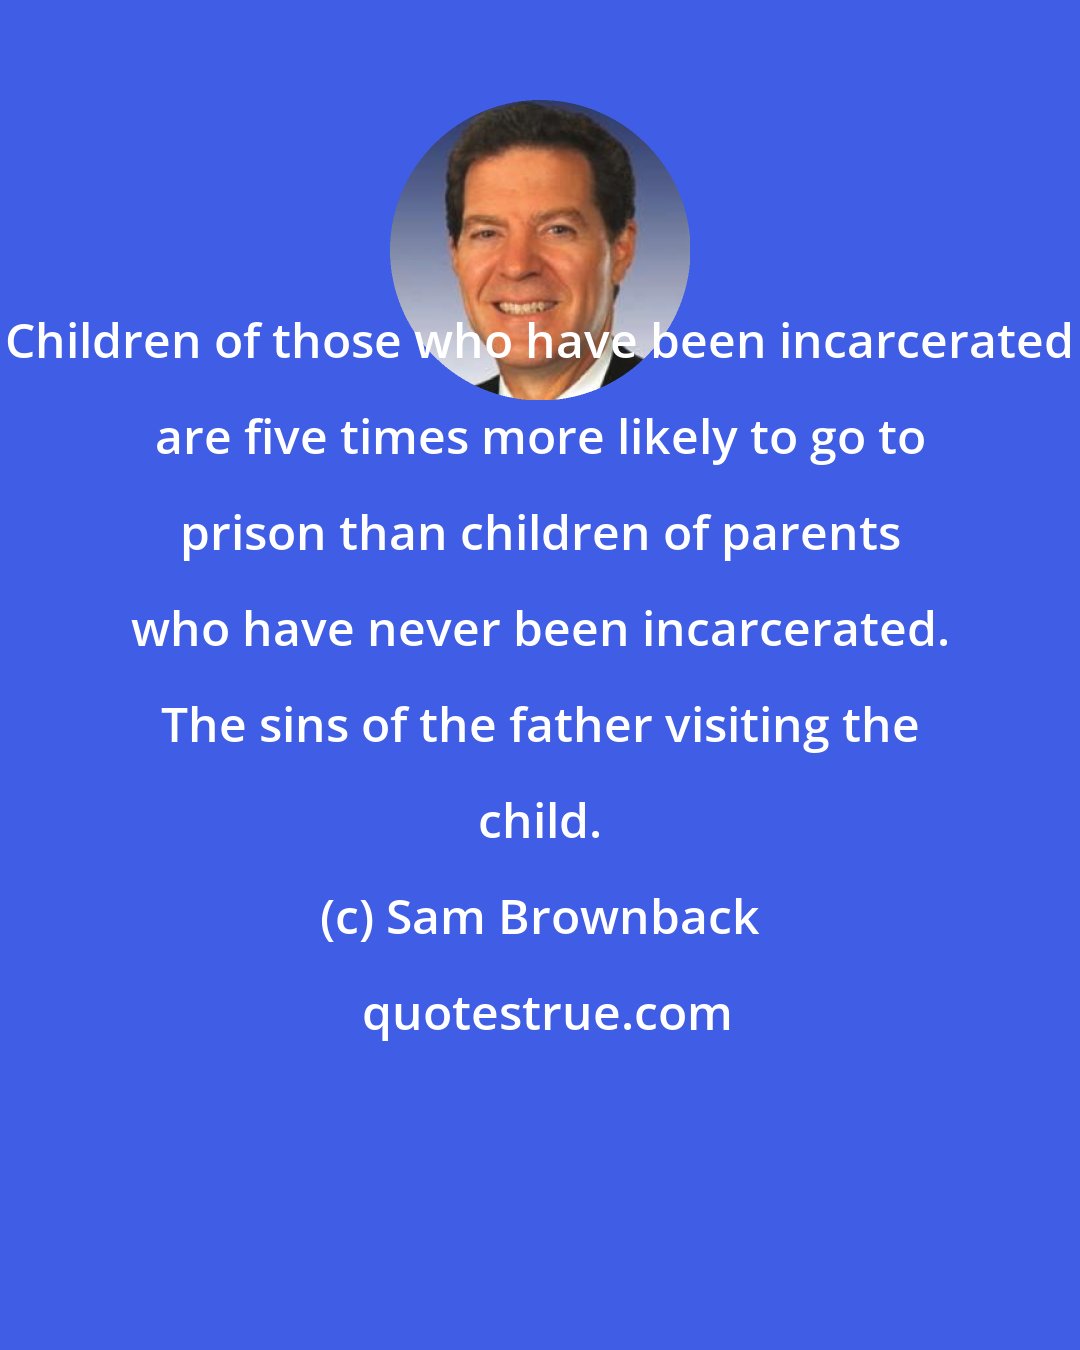 Sam Brownback: Children of those who have been incarcerated are five times more likely to go to prison than children of parents who have never been incarcerated. The sins of the father visiting the child.